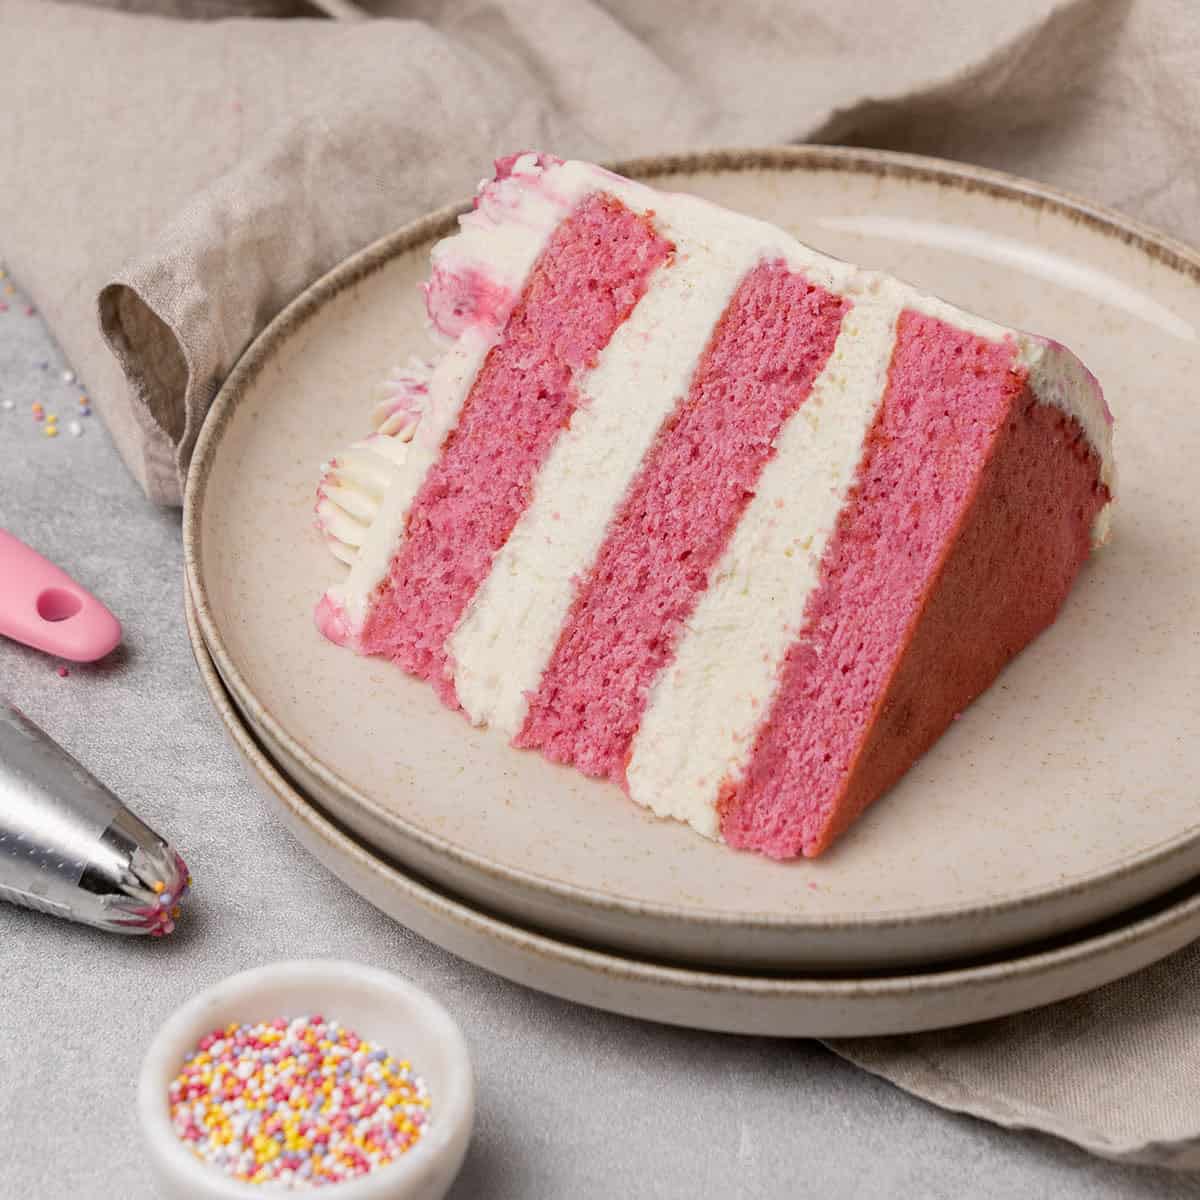 A slice of pink cake on a plate.